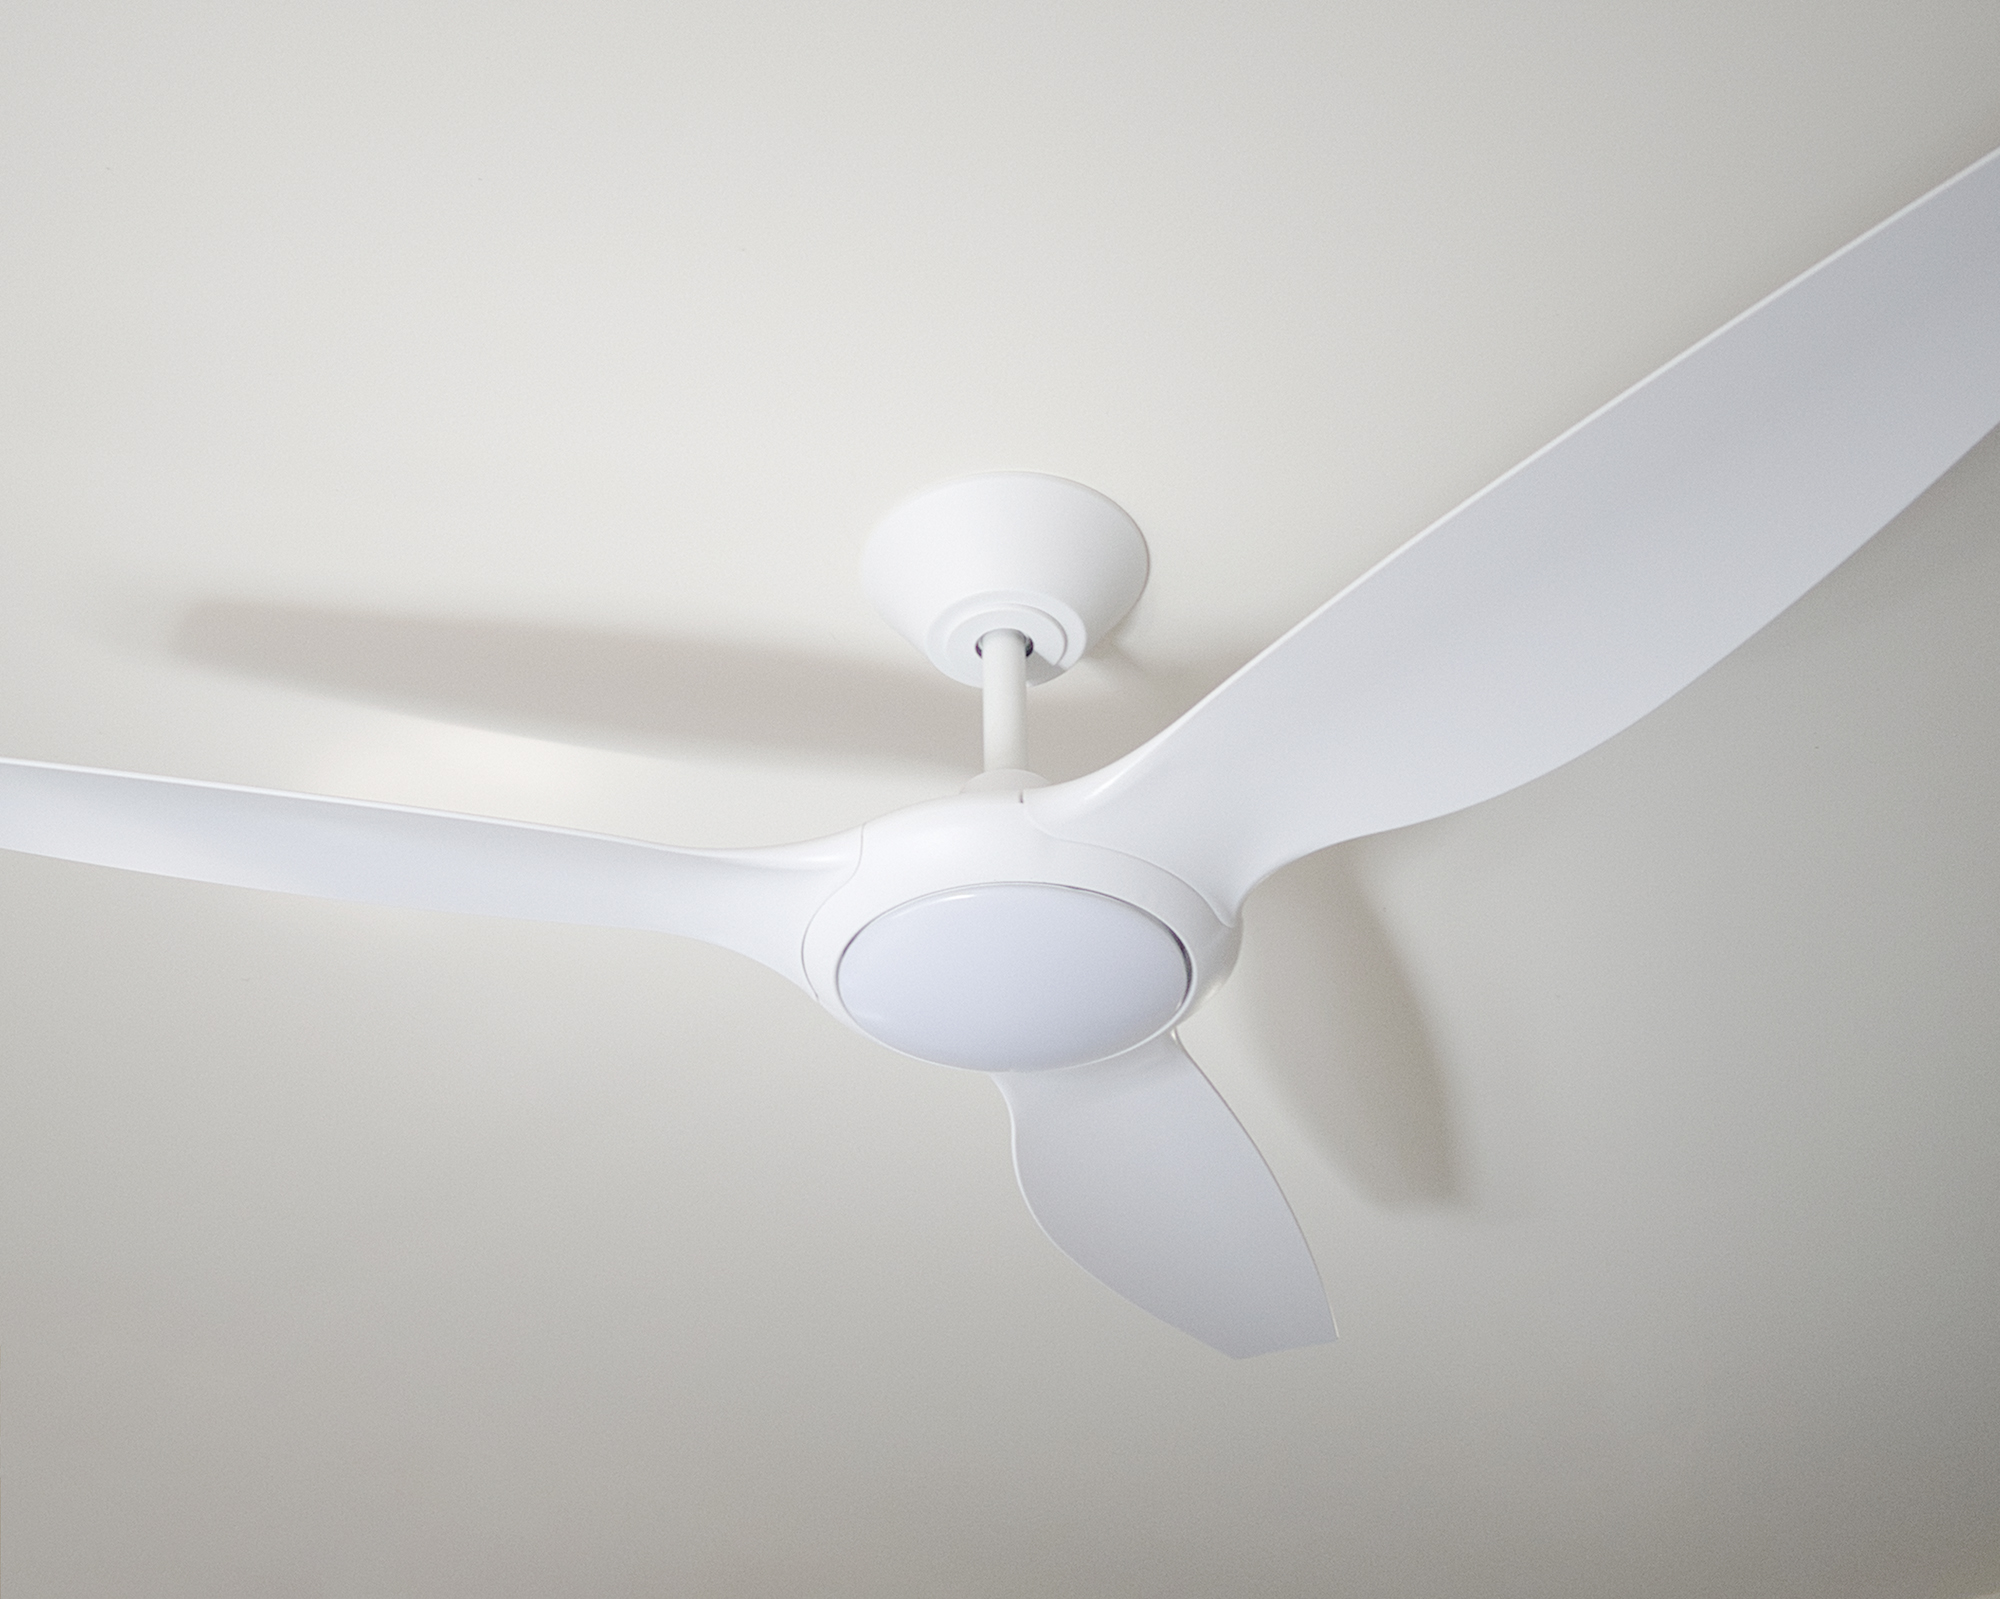 Delta DC Ceiling Fan now with 18W LED